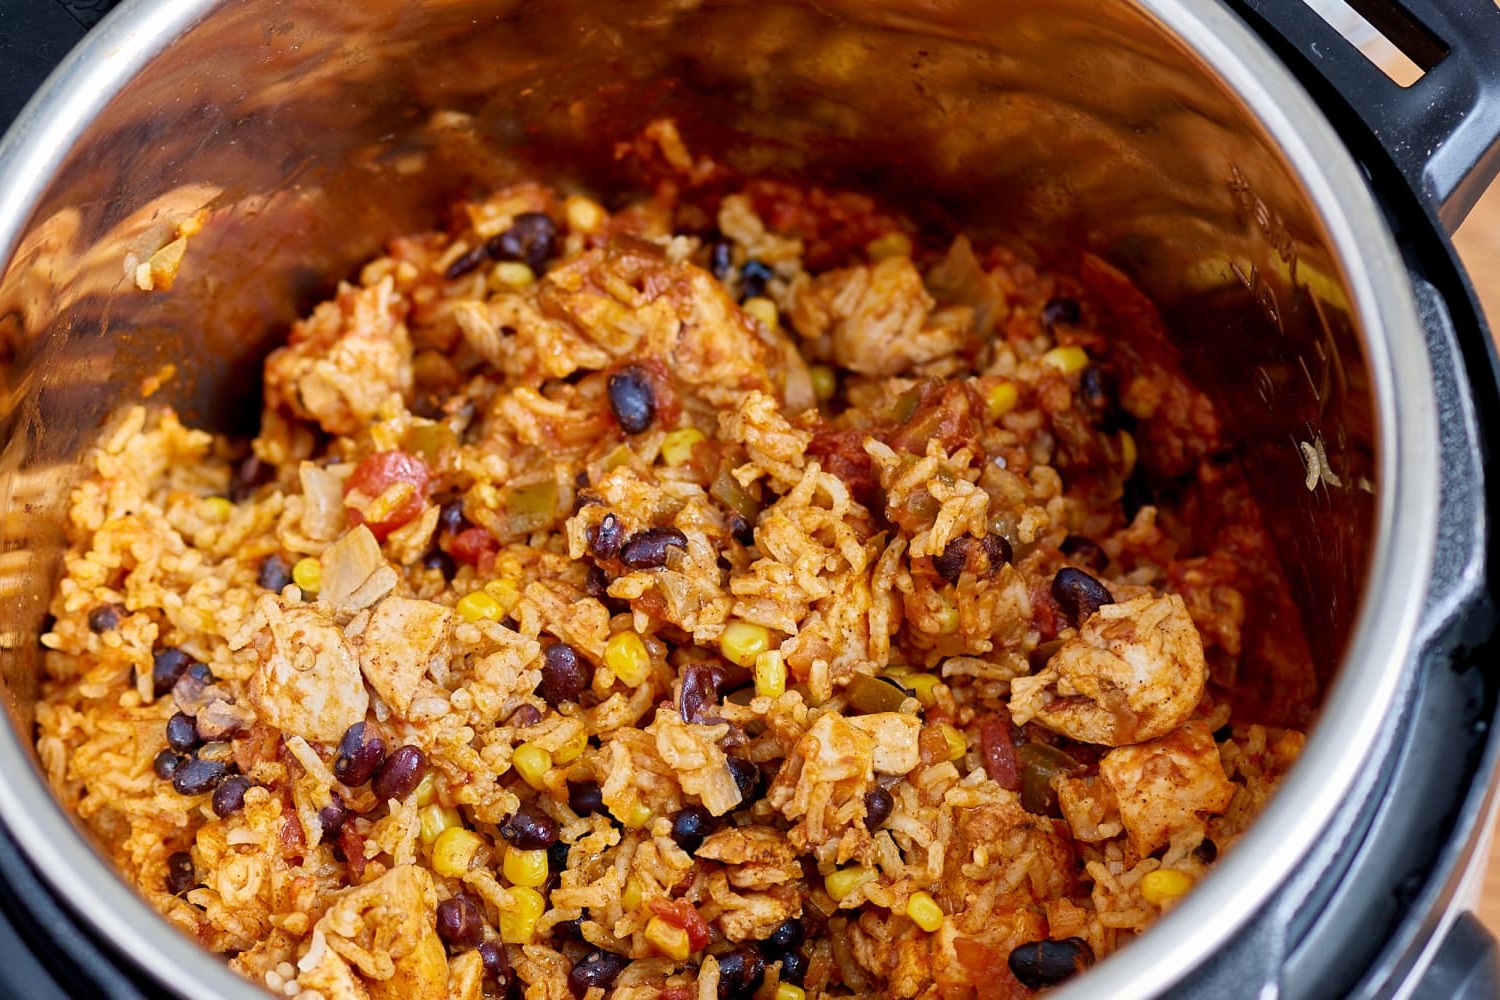 How to Make a Burrito in Any Pressure Cooker